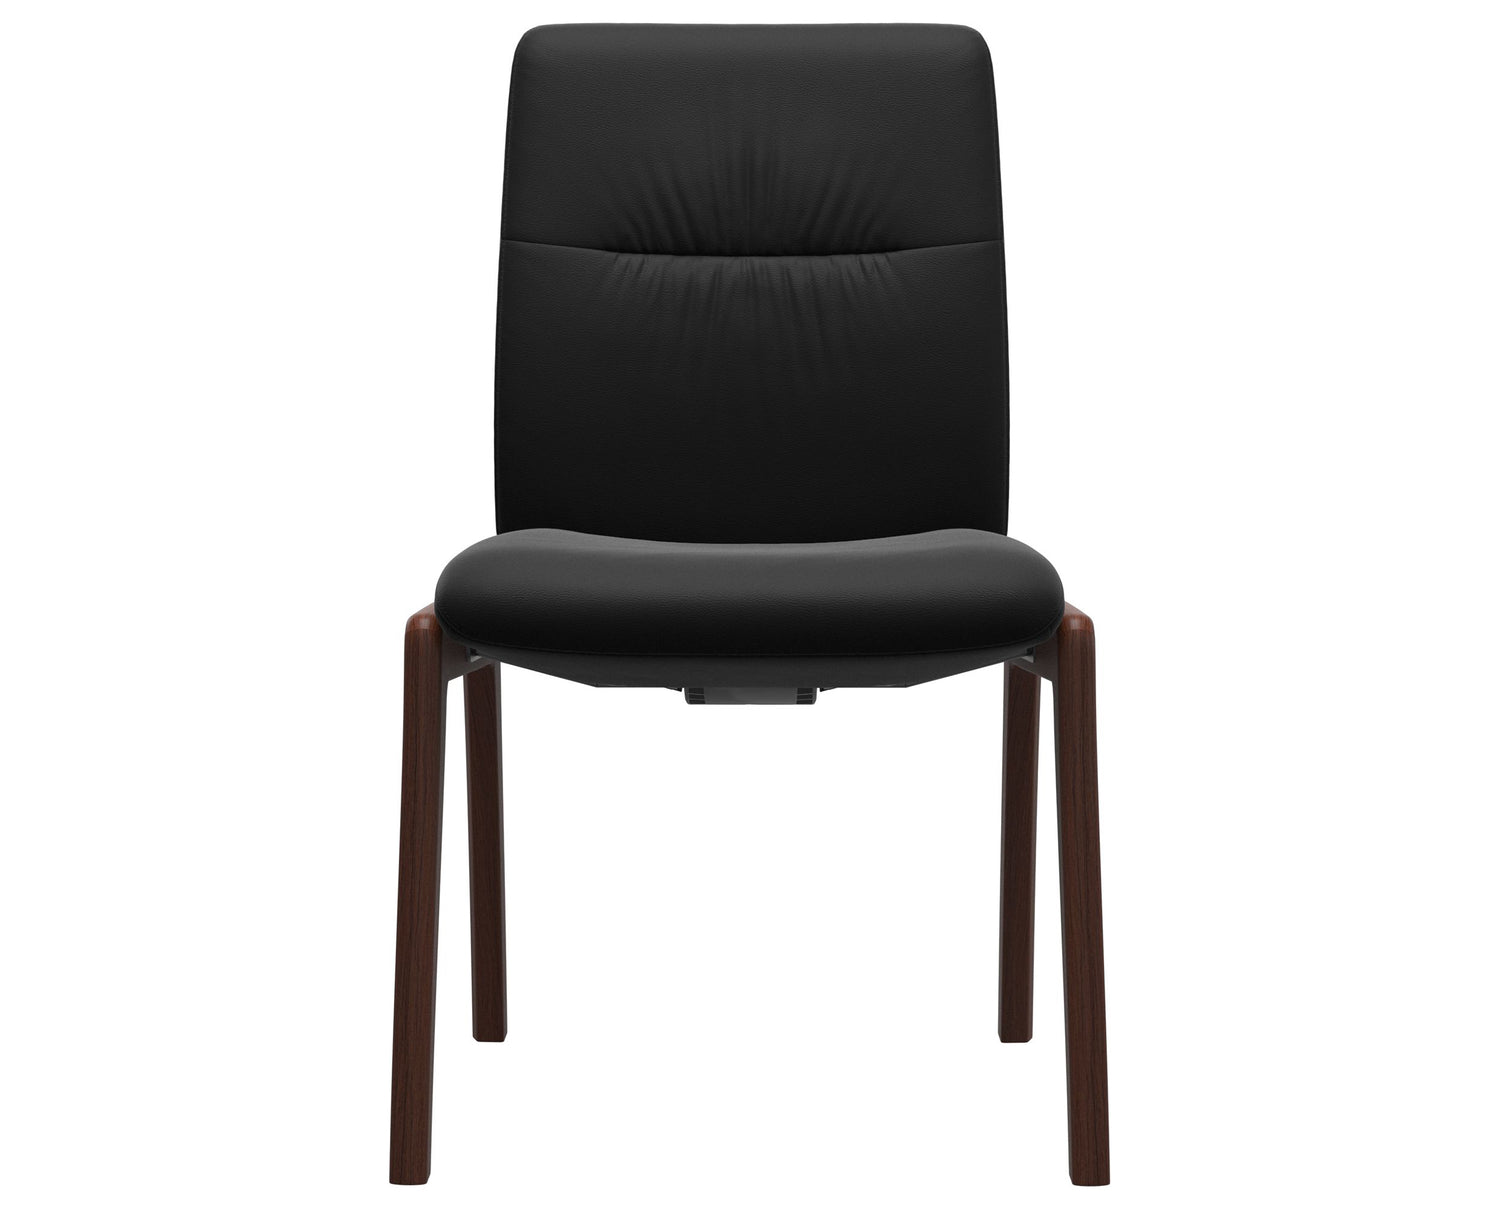 Paloma Leather Black & Walnut Base | Stressless Mint Low Back D100 Dining Chair | Valley Ridge Furniture